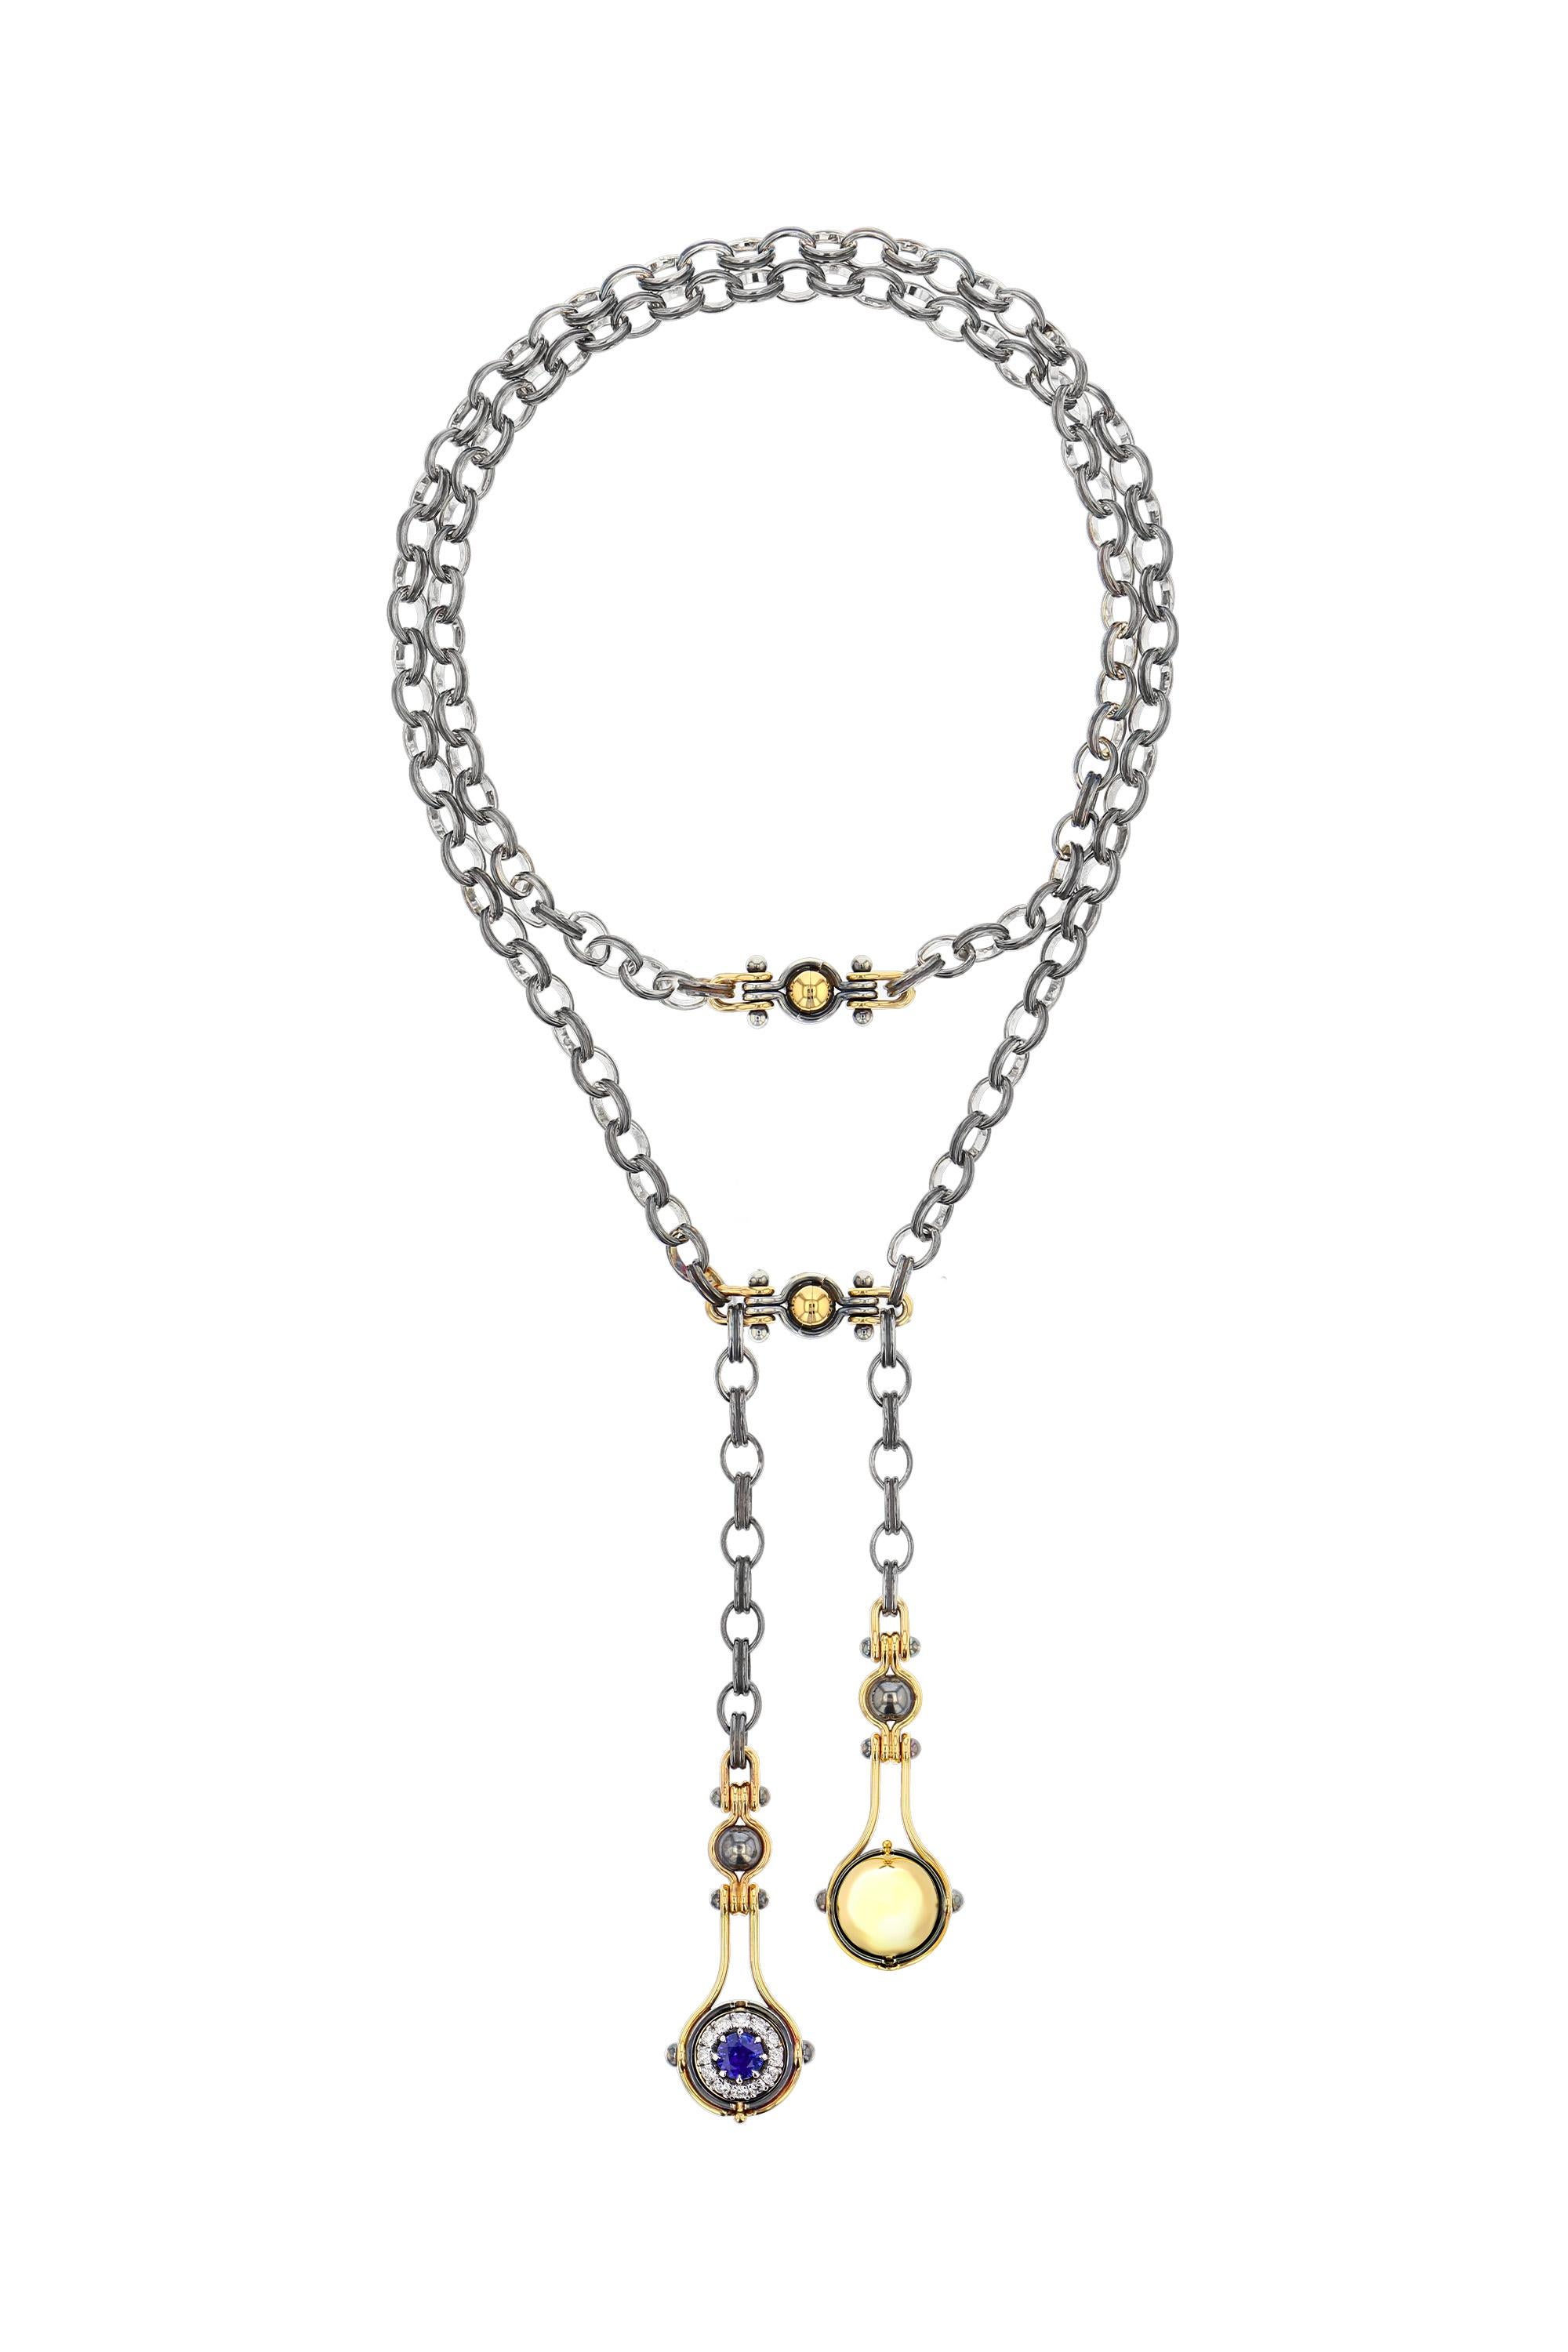 Neoclassical Deux Gouttes Sapphire & Diamond Necklace in 18k Yellow Gold by Elie Top For Sale